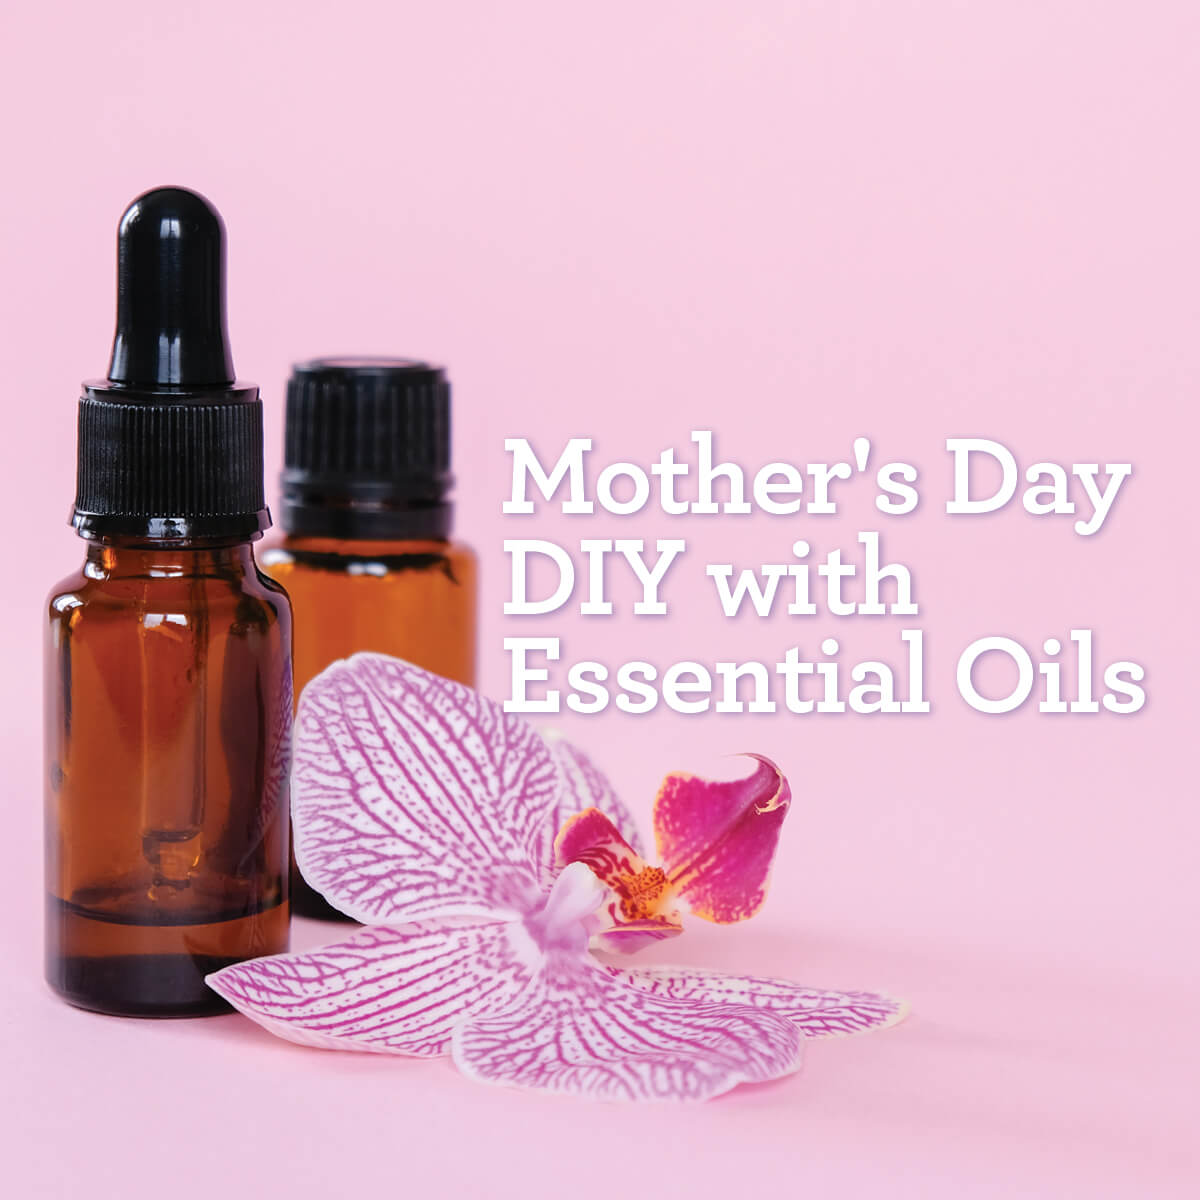 Mother's Day DIY with Essential Oils